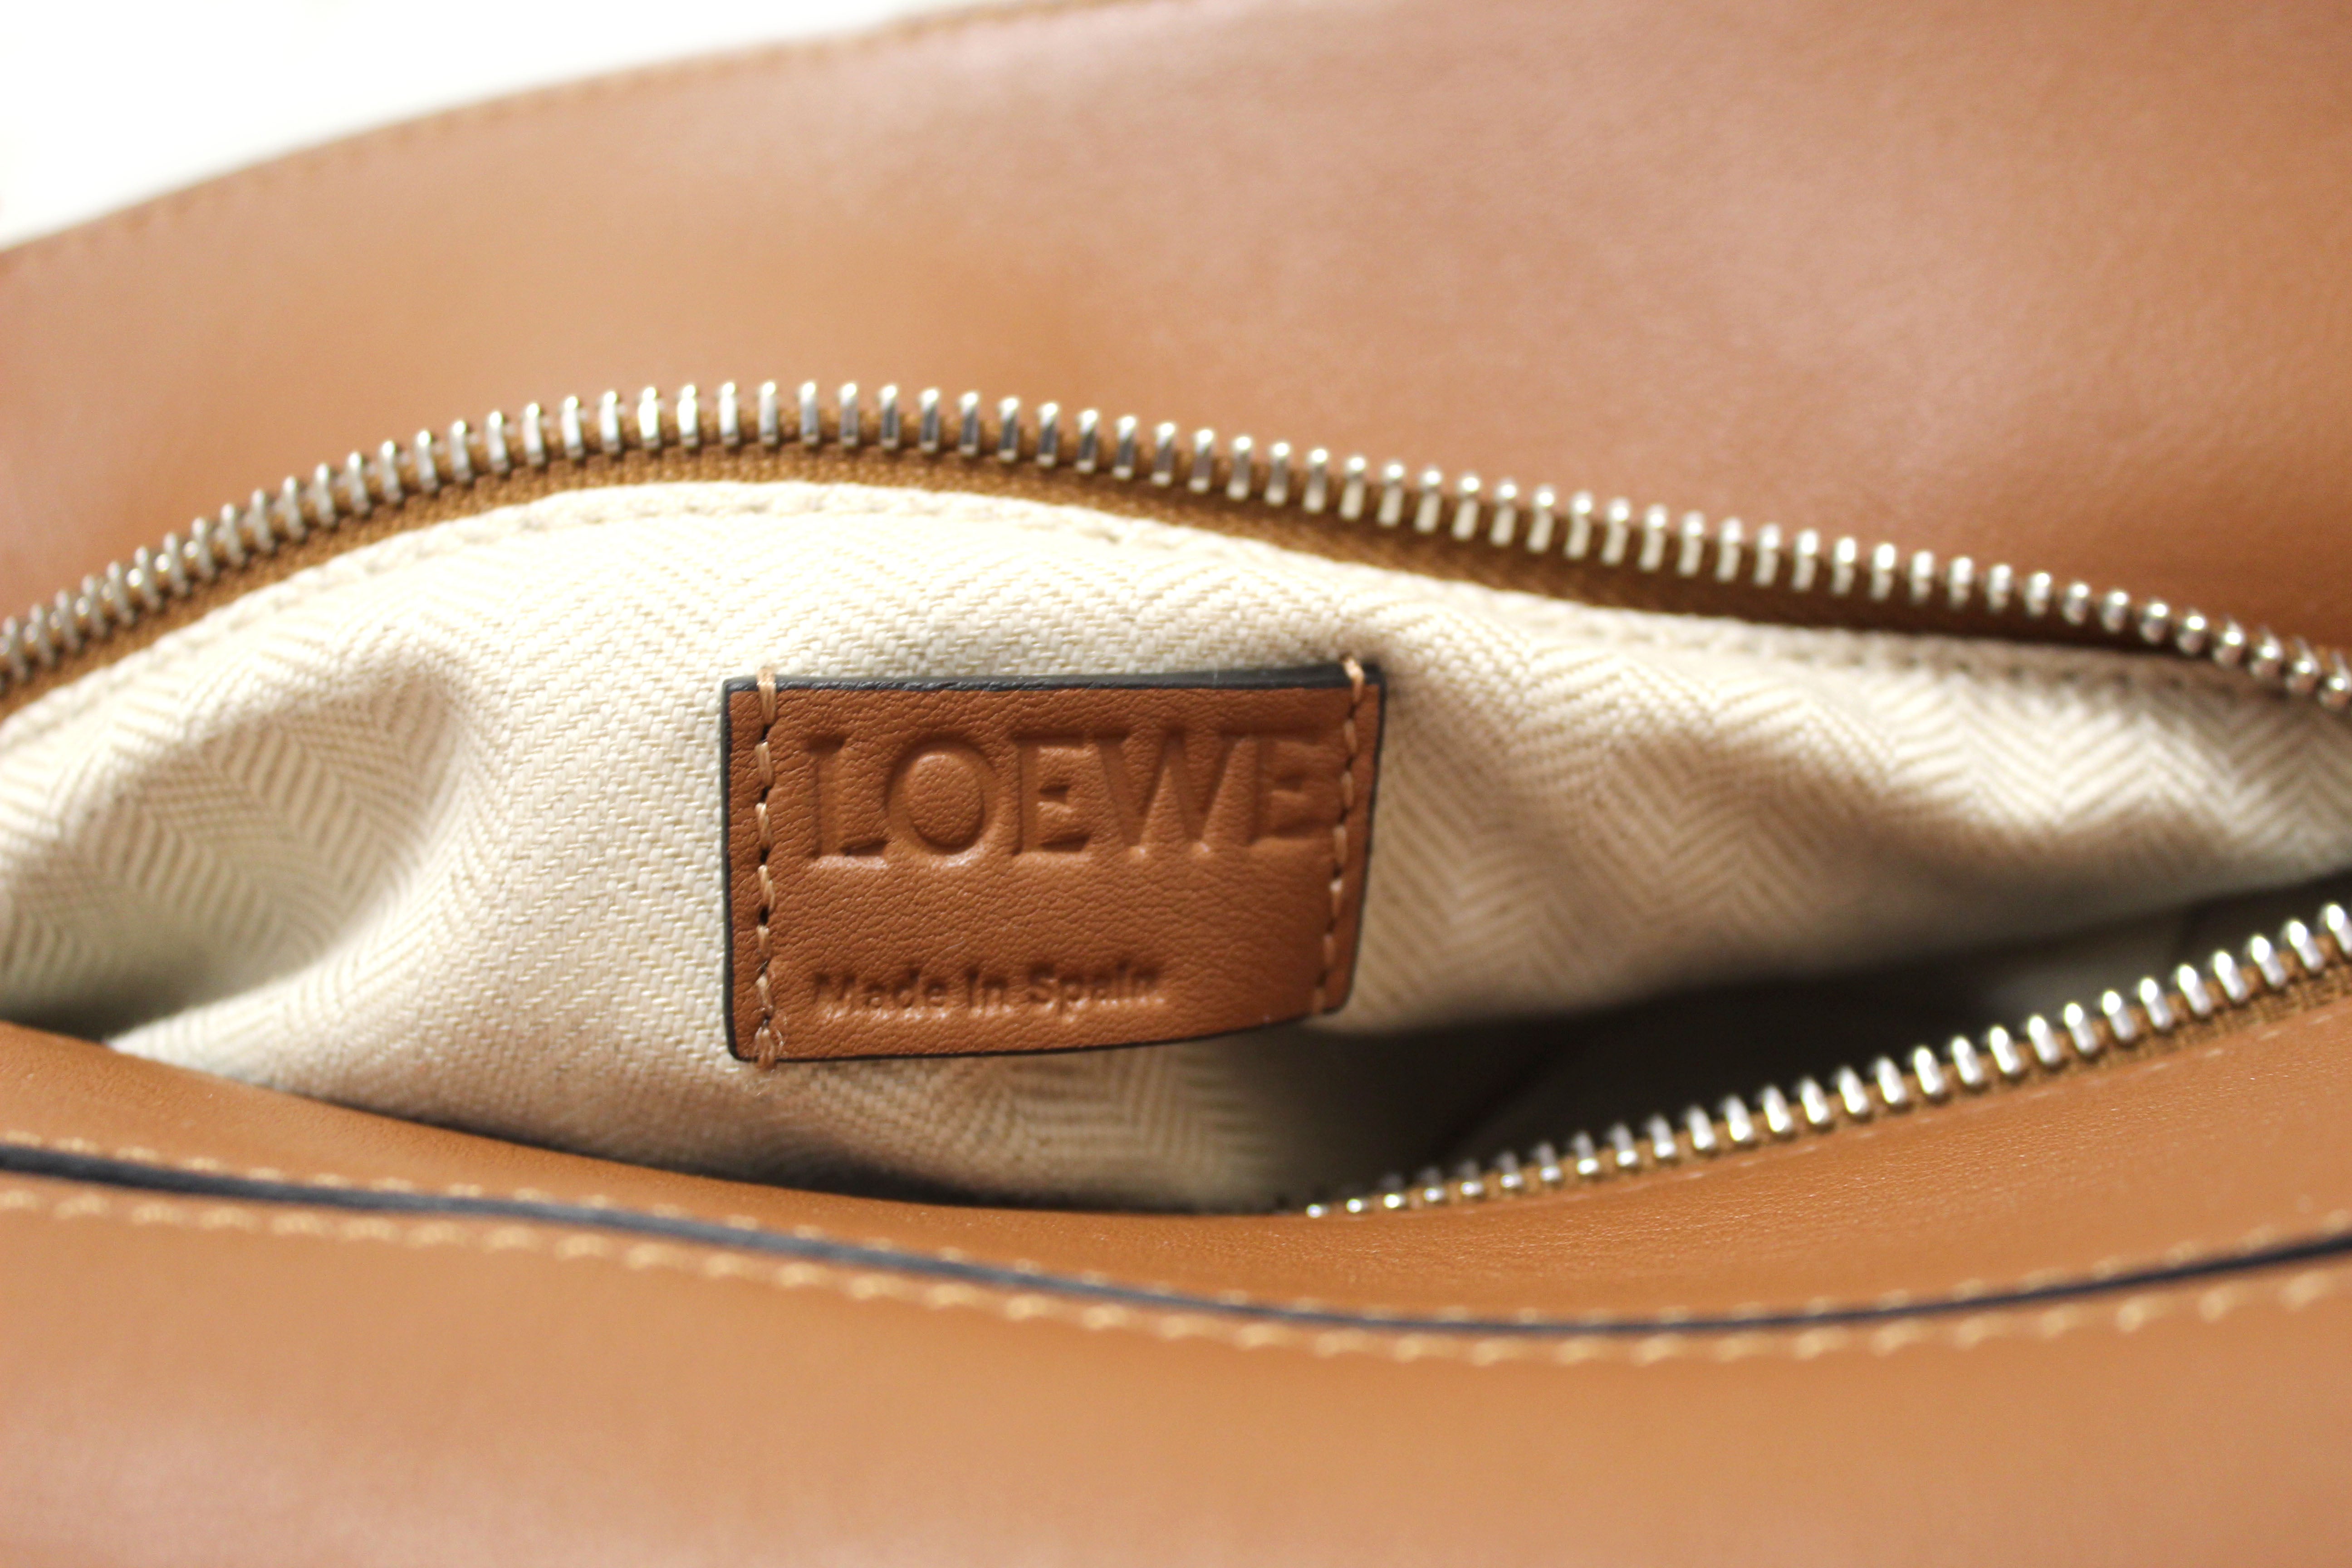 Authentic Loewe Brown Calfskin Small Puzzle Bag